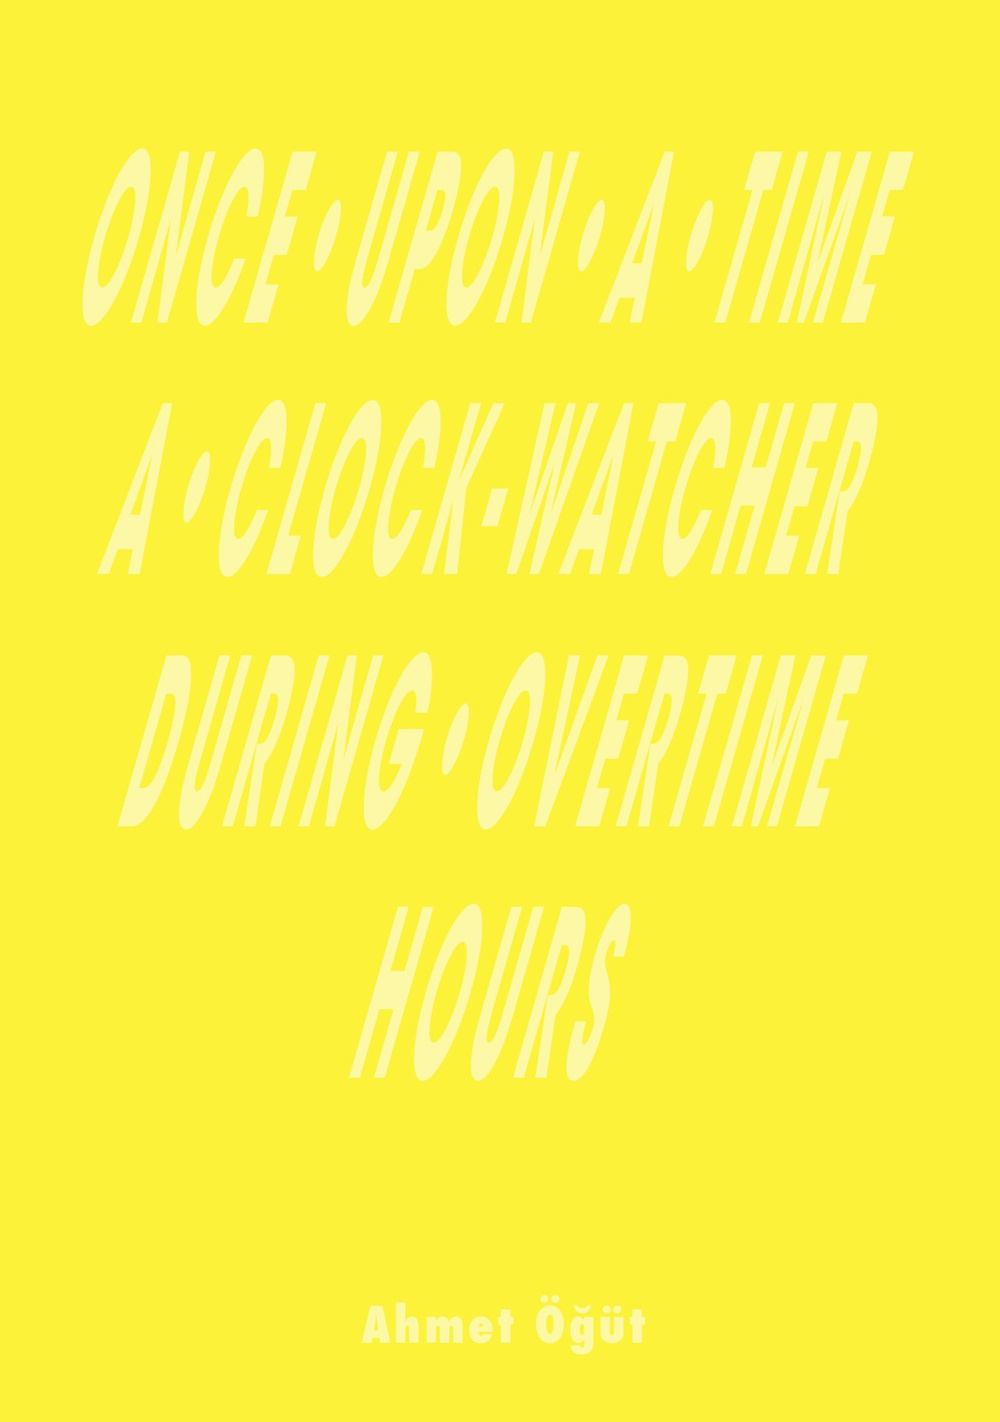 Once upon a time a clock-watcher during overtime hours